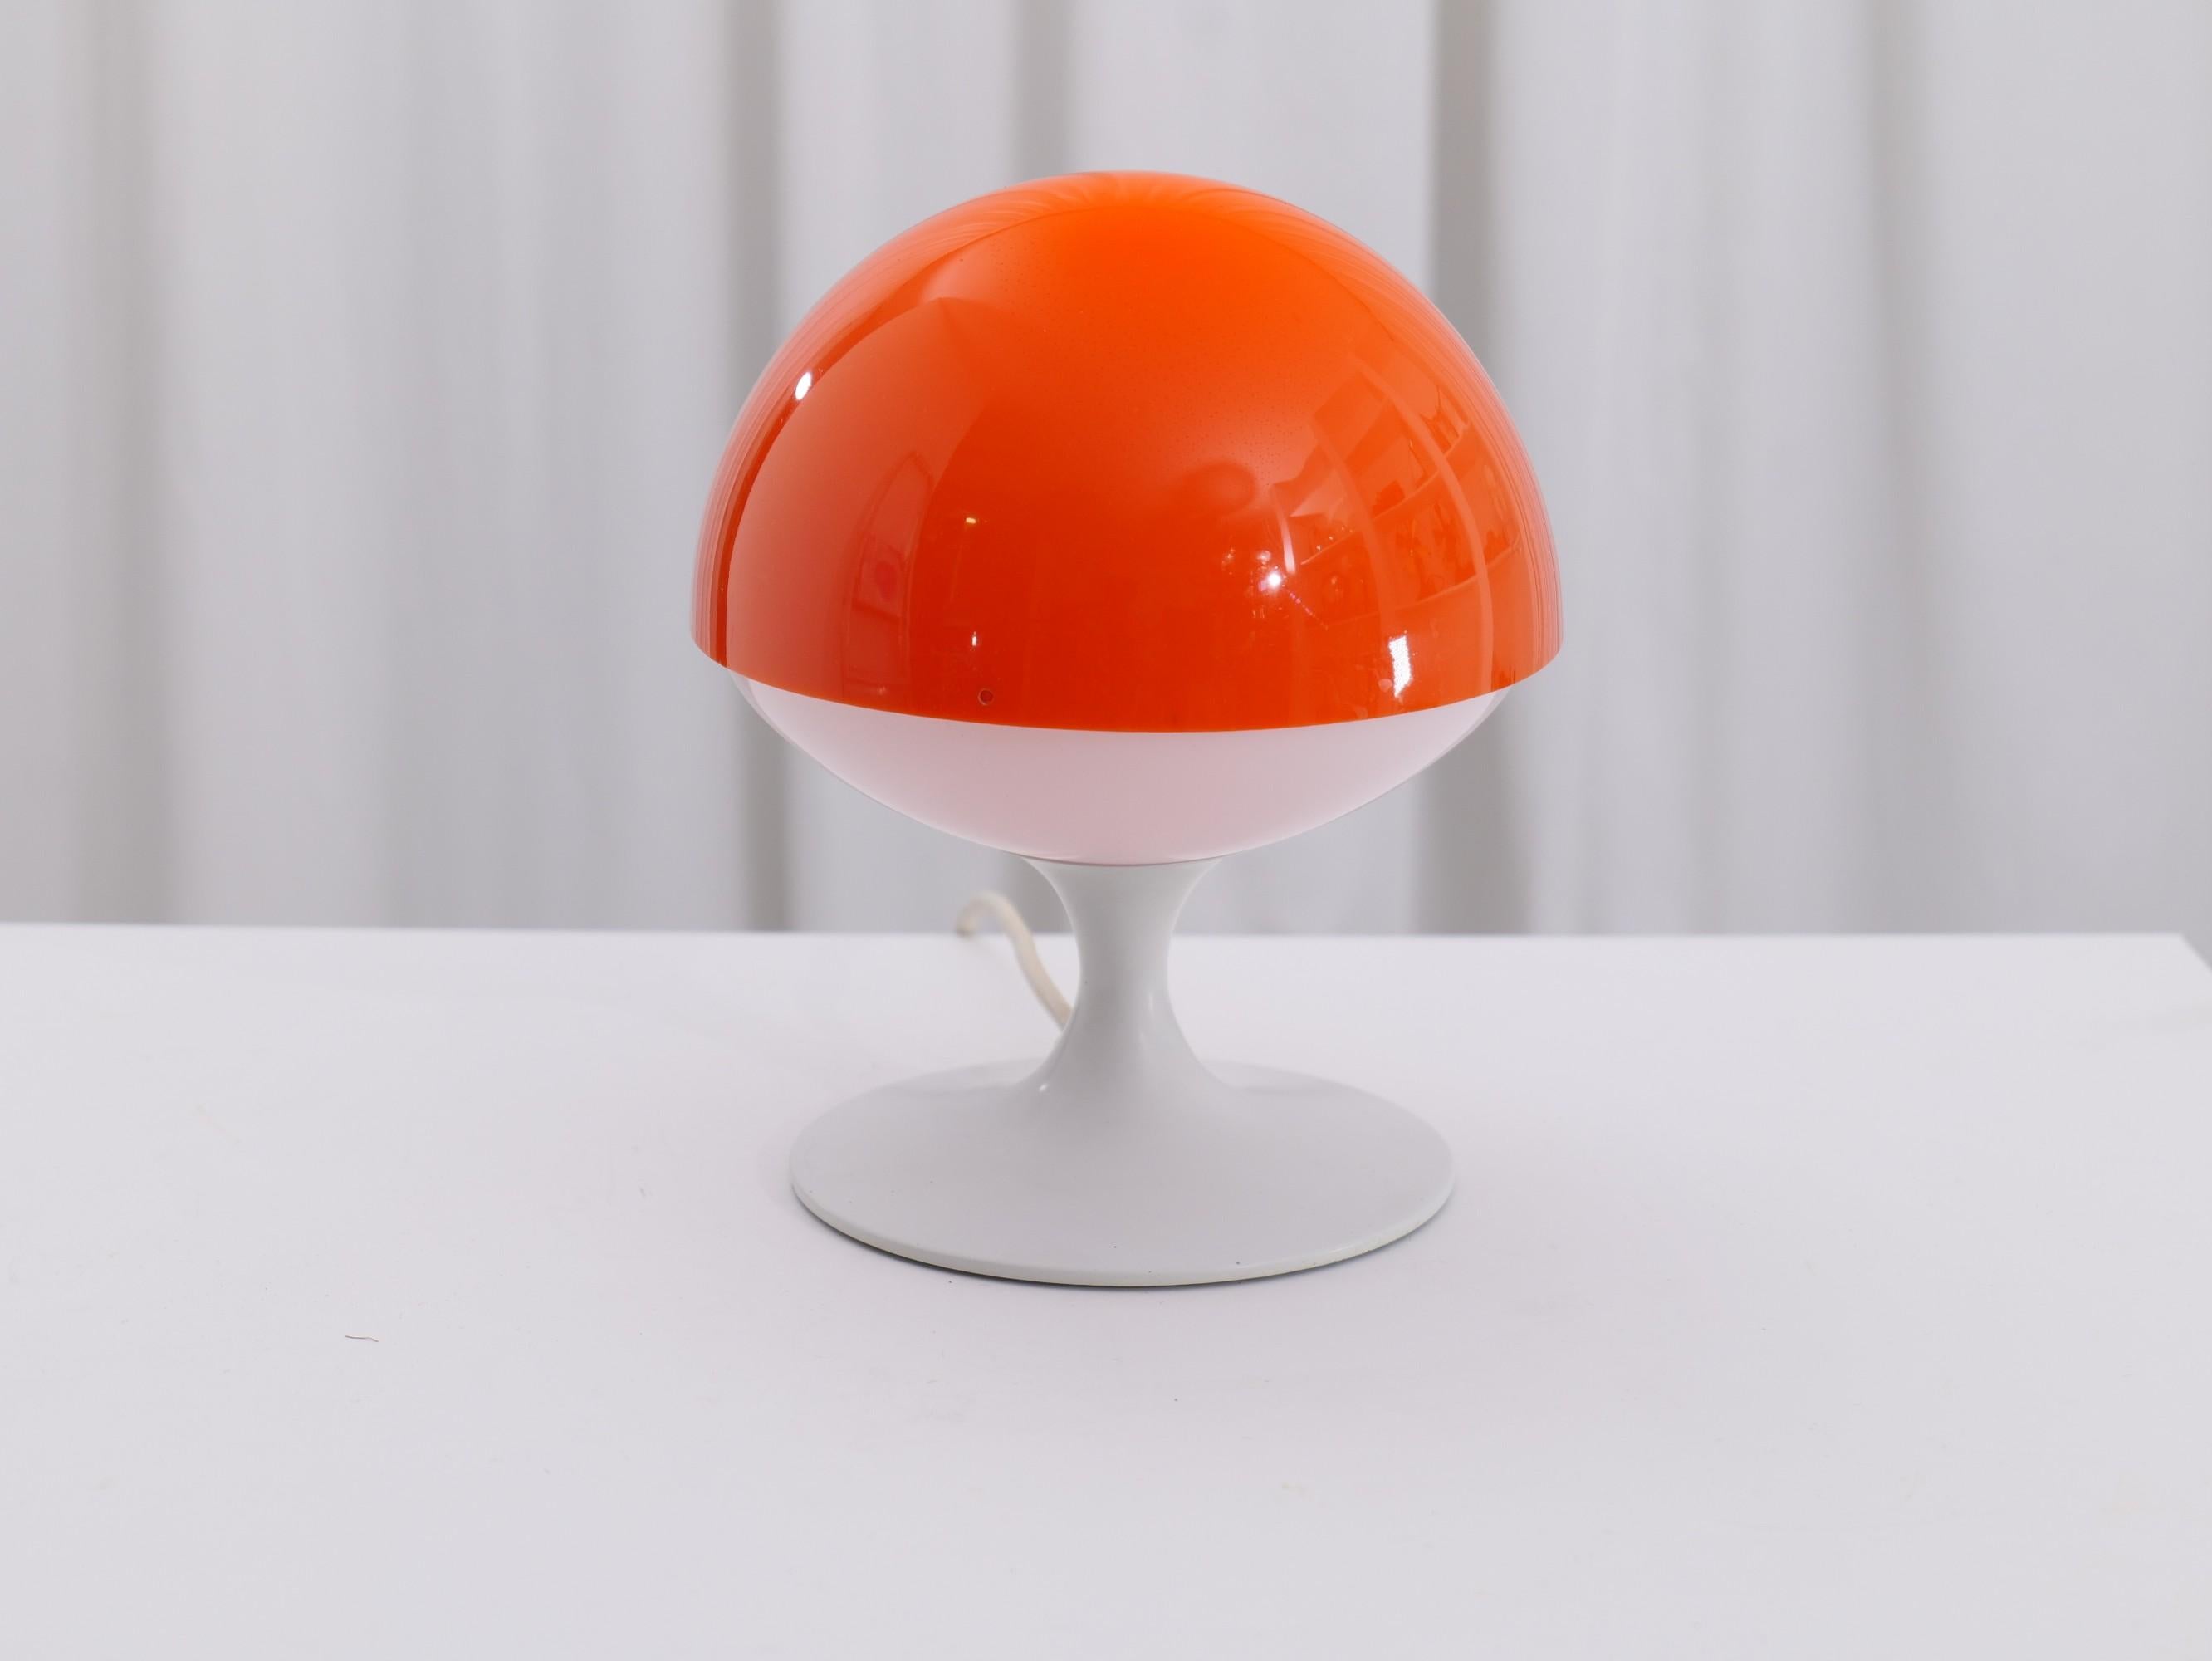 Very rare lamp from Temde lamps from the Space Age era. Iconic design of the 70s. The metal tulip base completes the design.
Original and very good condition with light patina due to age.
1970's - Swiss
 

Dimensions:
23 cm height
20 cm